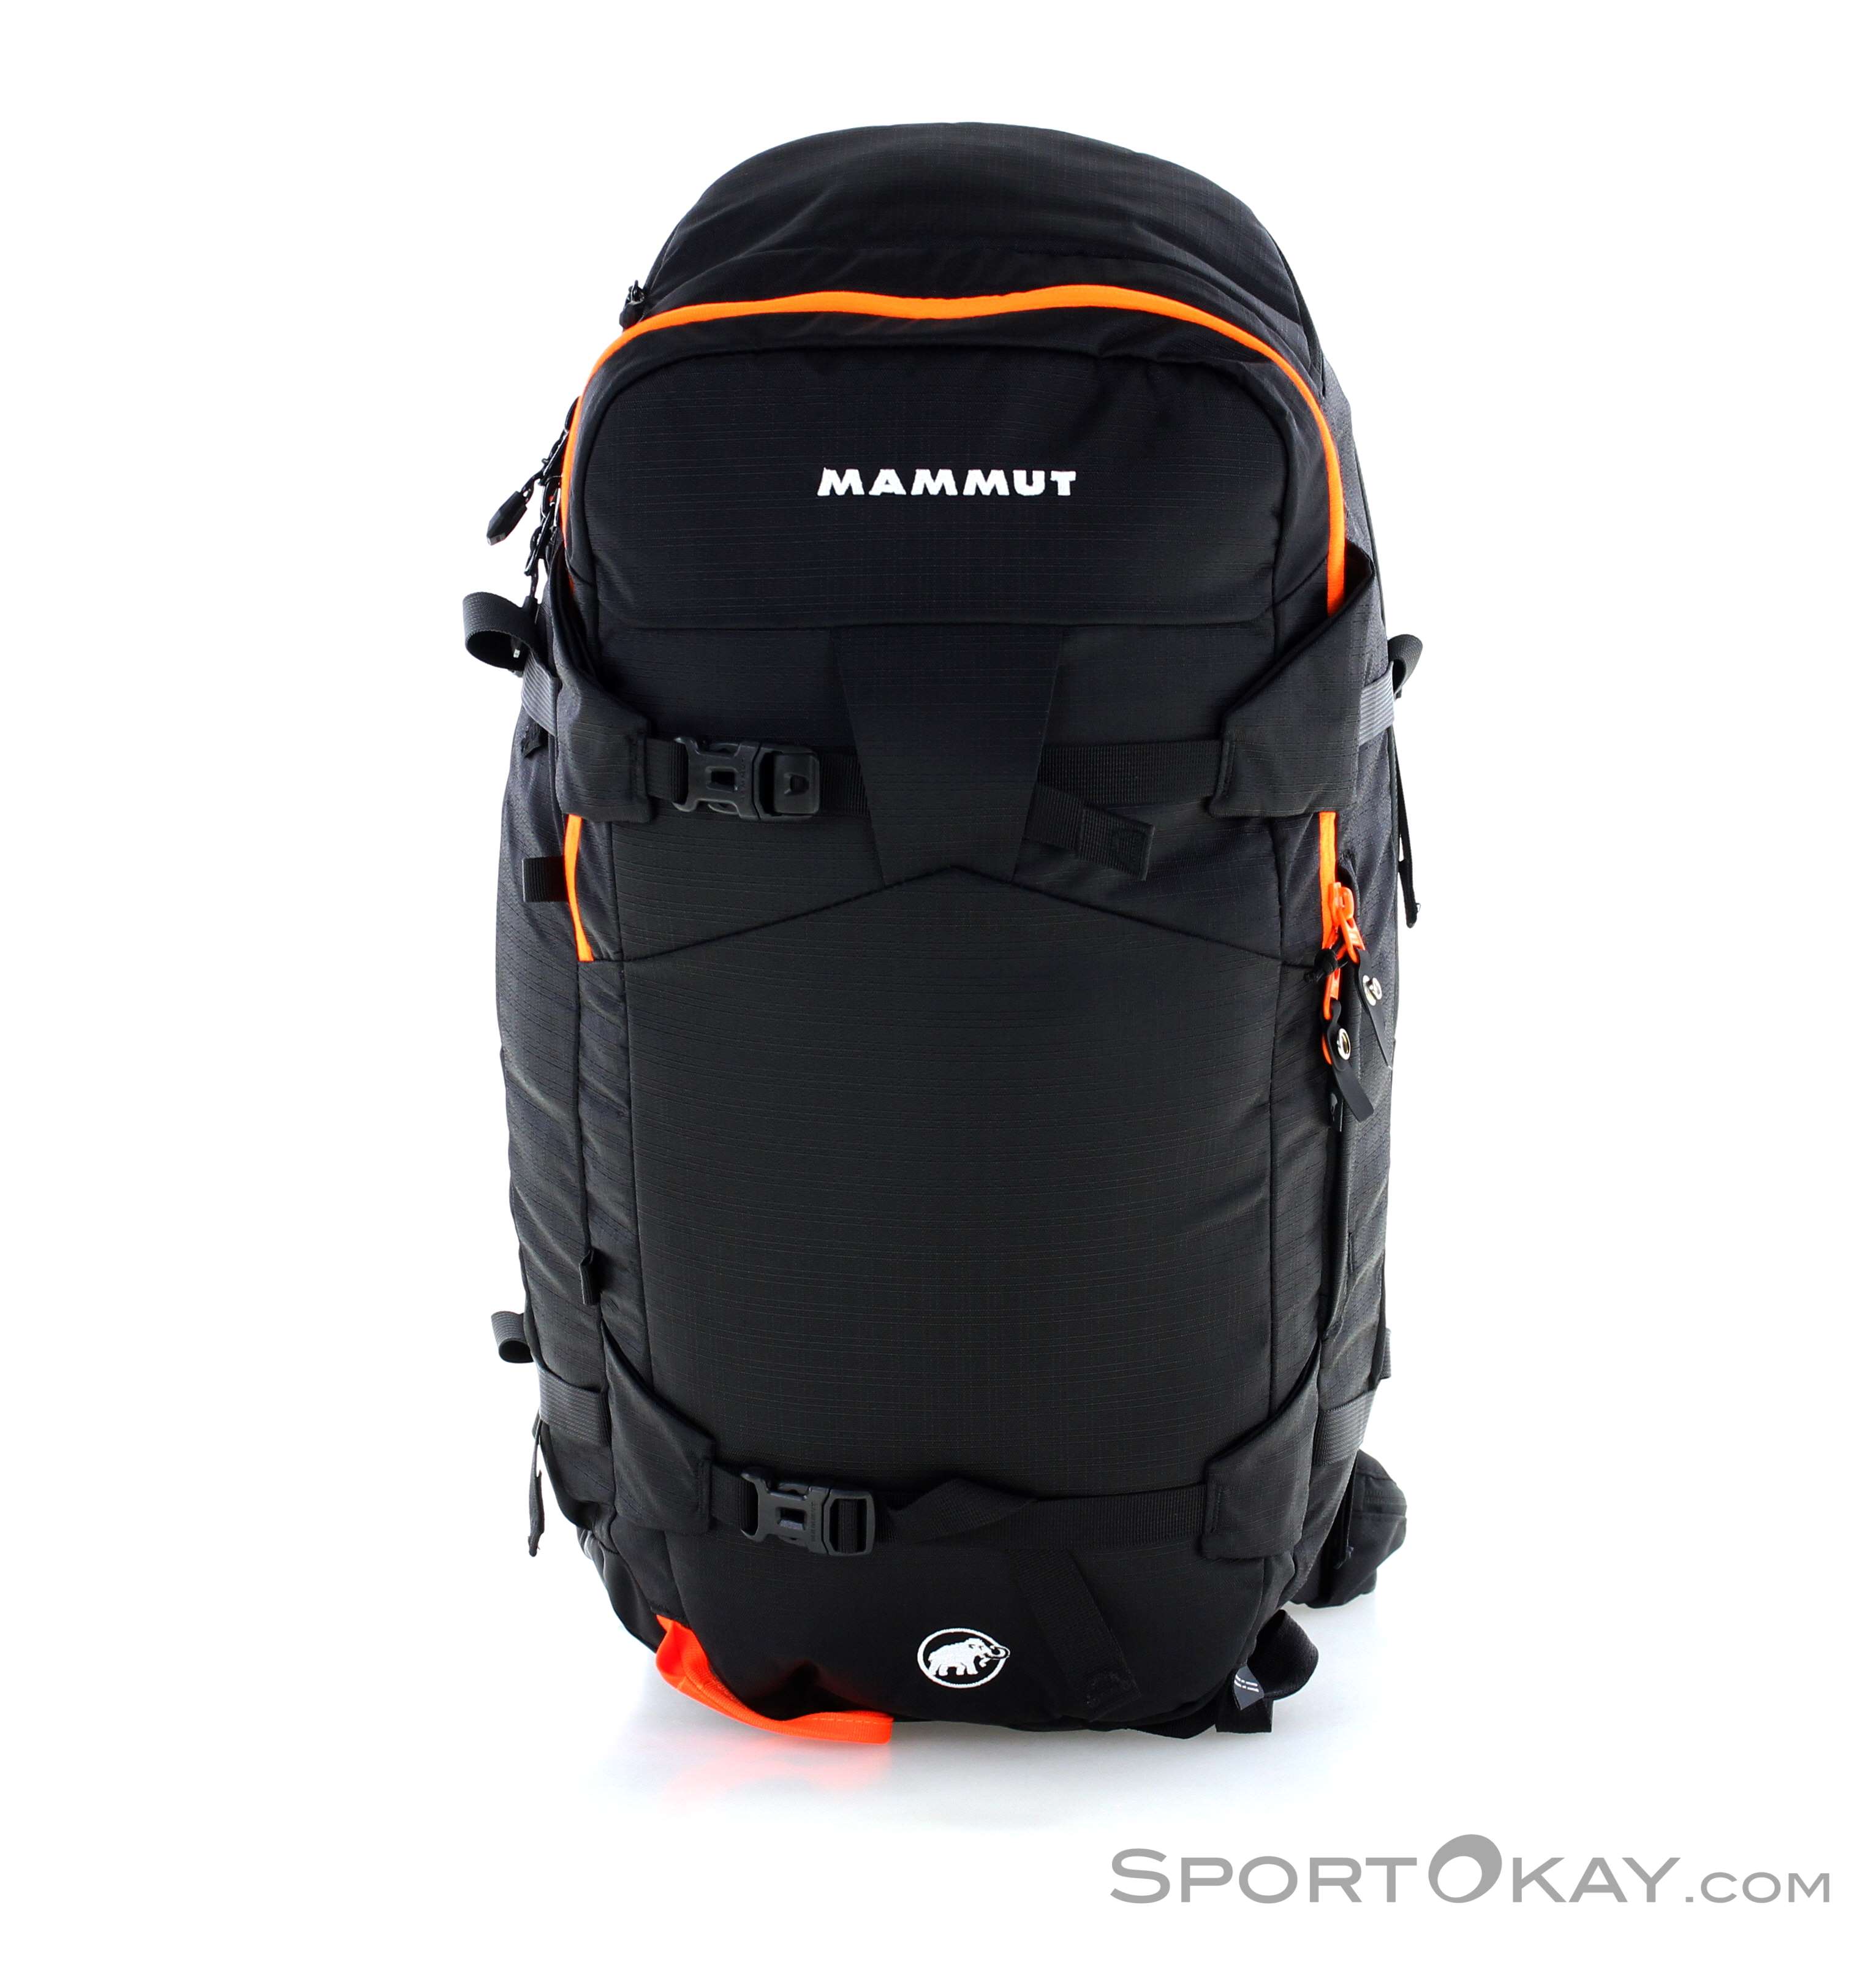 Mammut Pro RAS 3.0 45l Backpack without cartridge - Backpacks - Safety Ski & Freeride - All